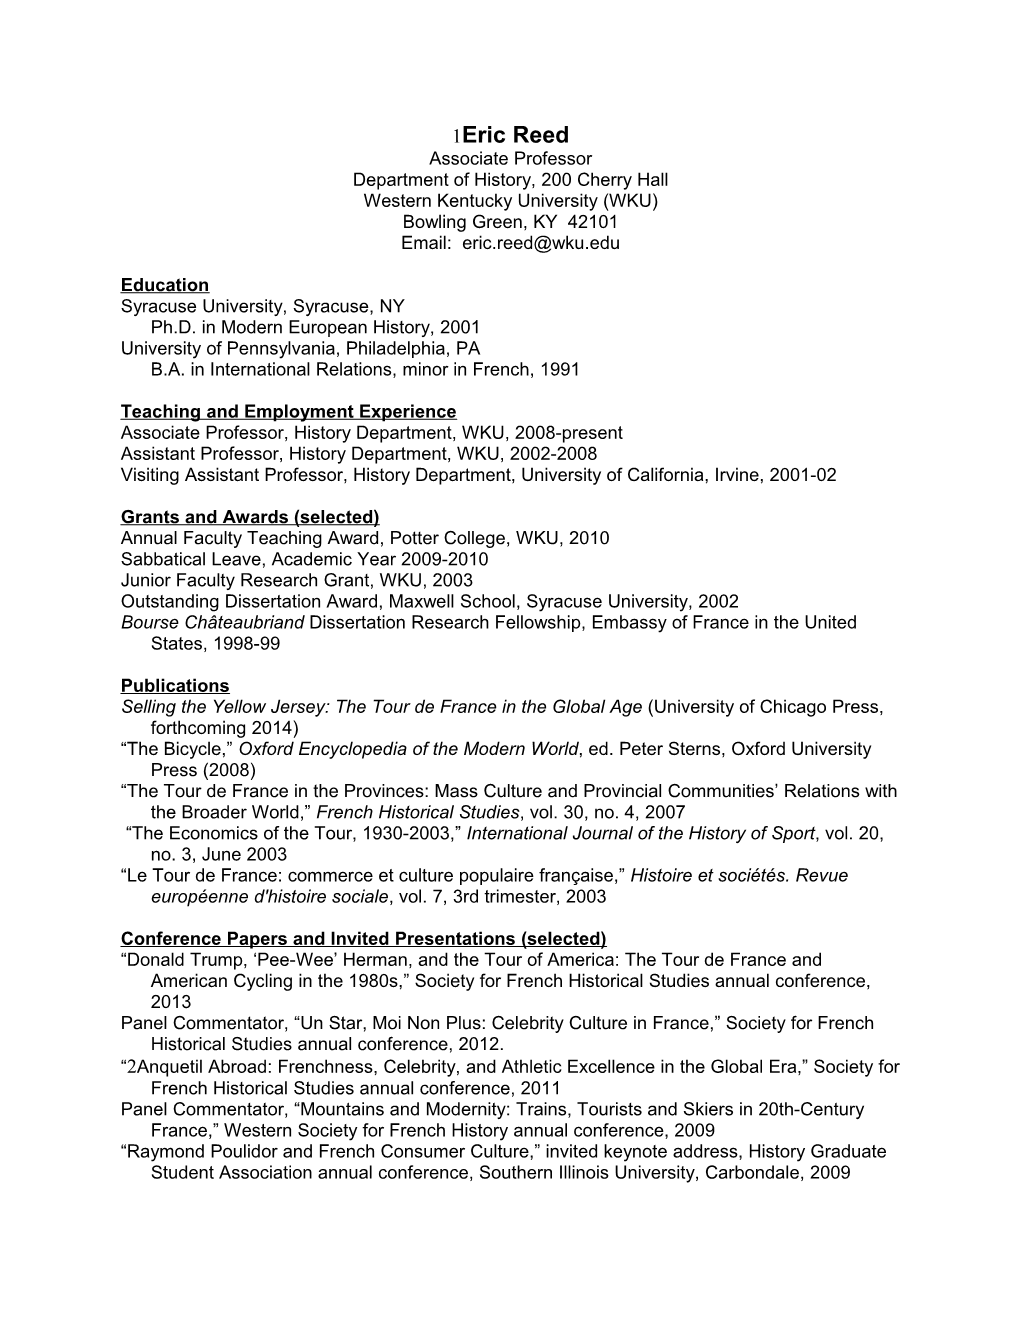 Eric Reed CV, Page 1